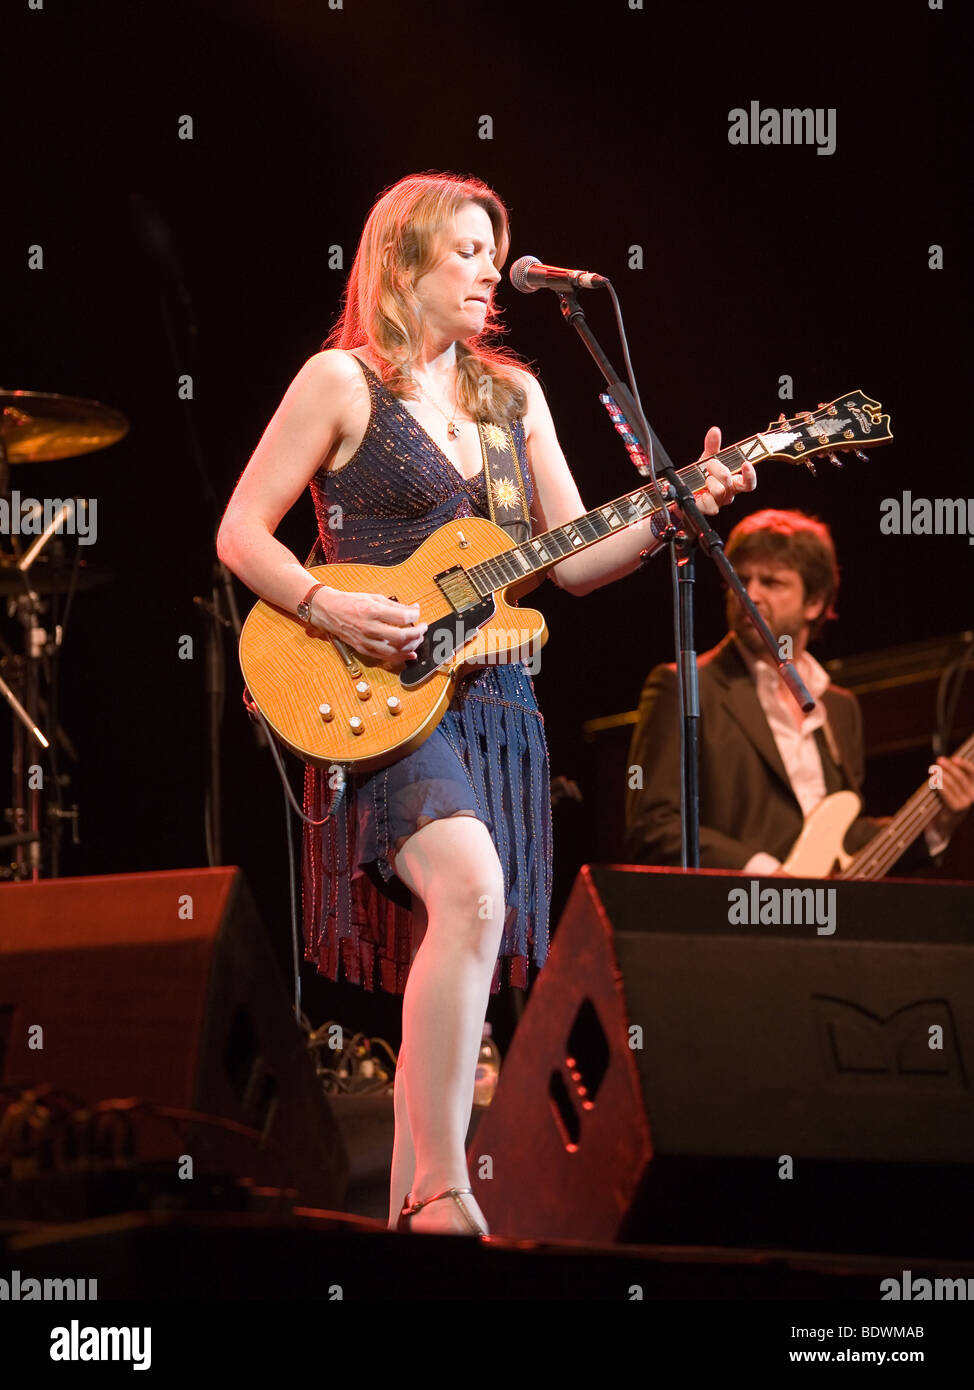 BUDAPEST-JULY 16: Susan Tedeschi perform on stage at Sportarena July 16, 2009 in Budapest, Hungary Stock Photo